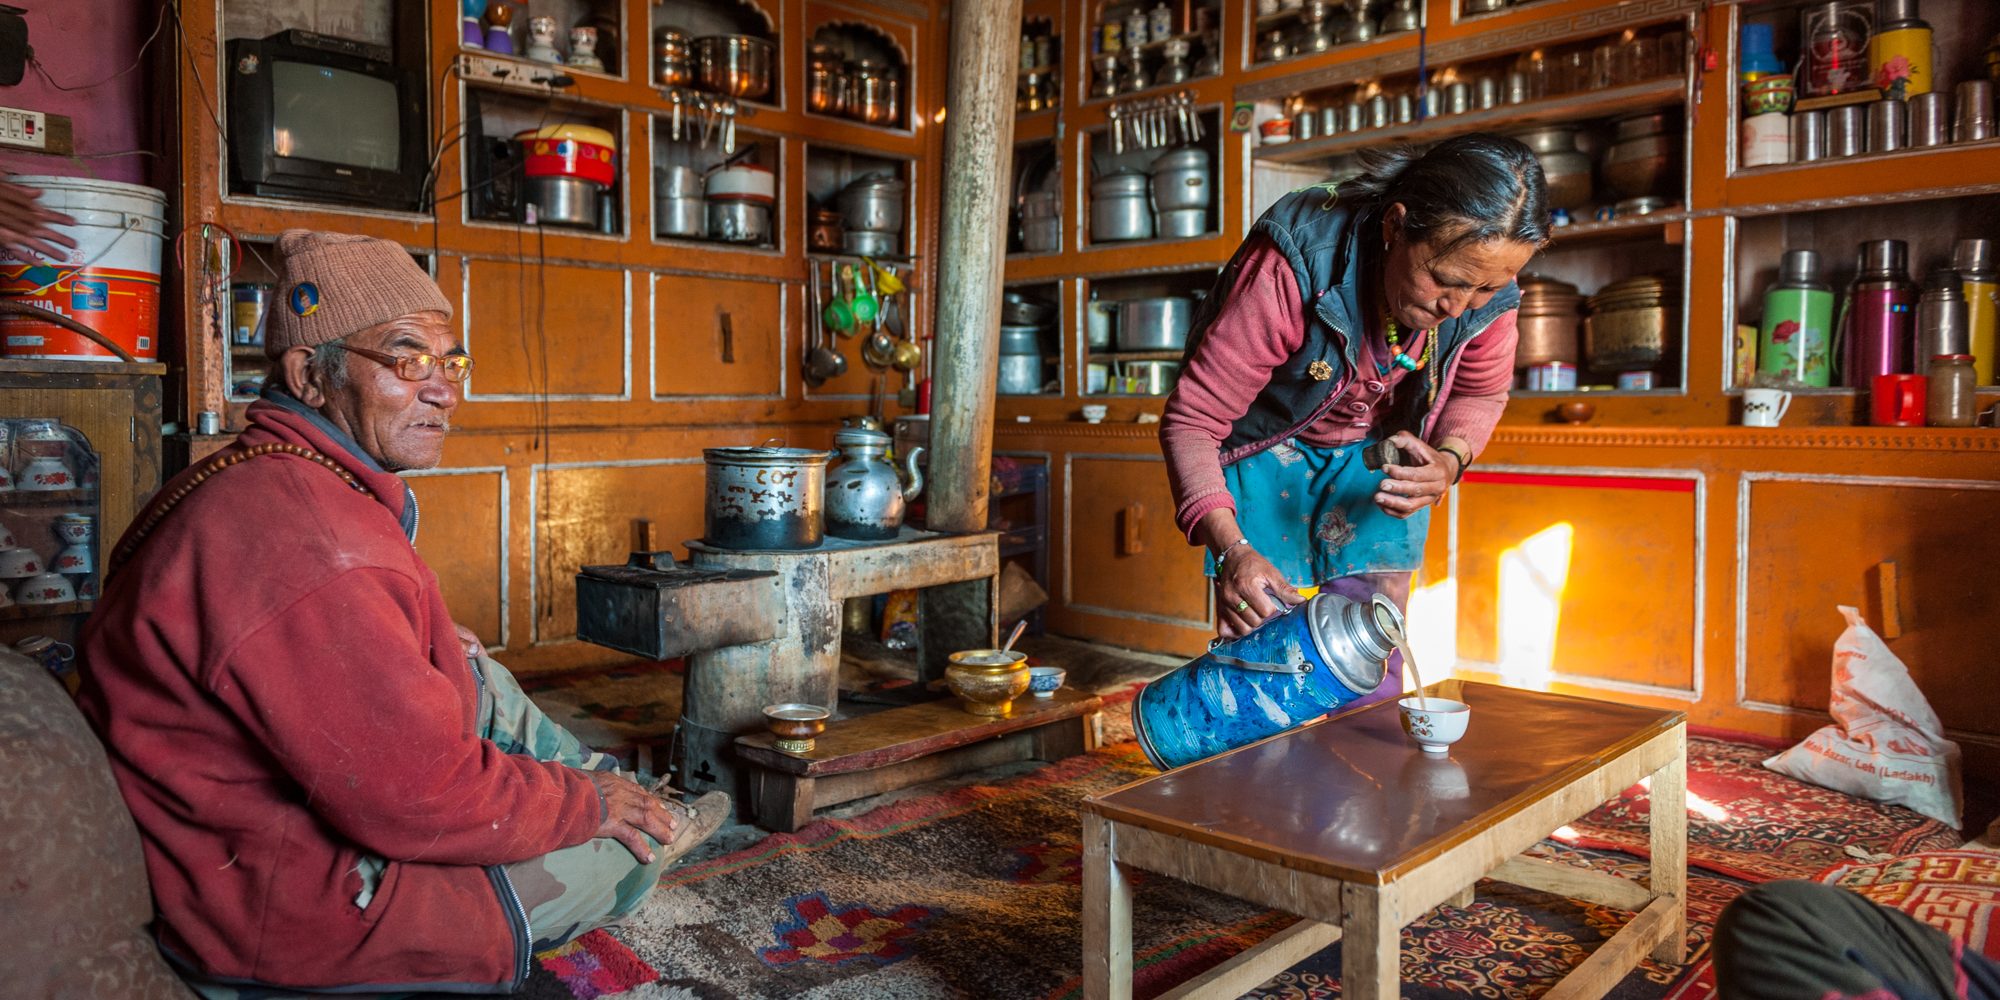 The cold winter will be forgotten with the warm Ladakhi hospitality.